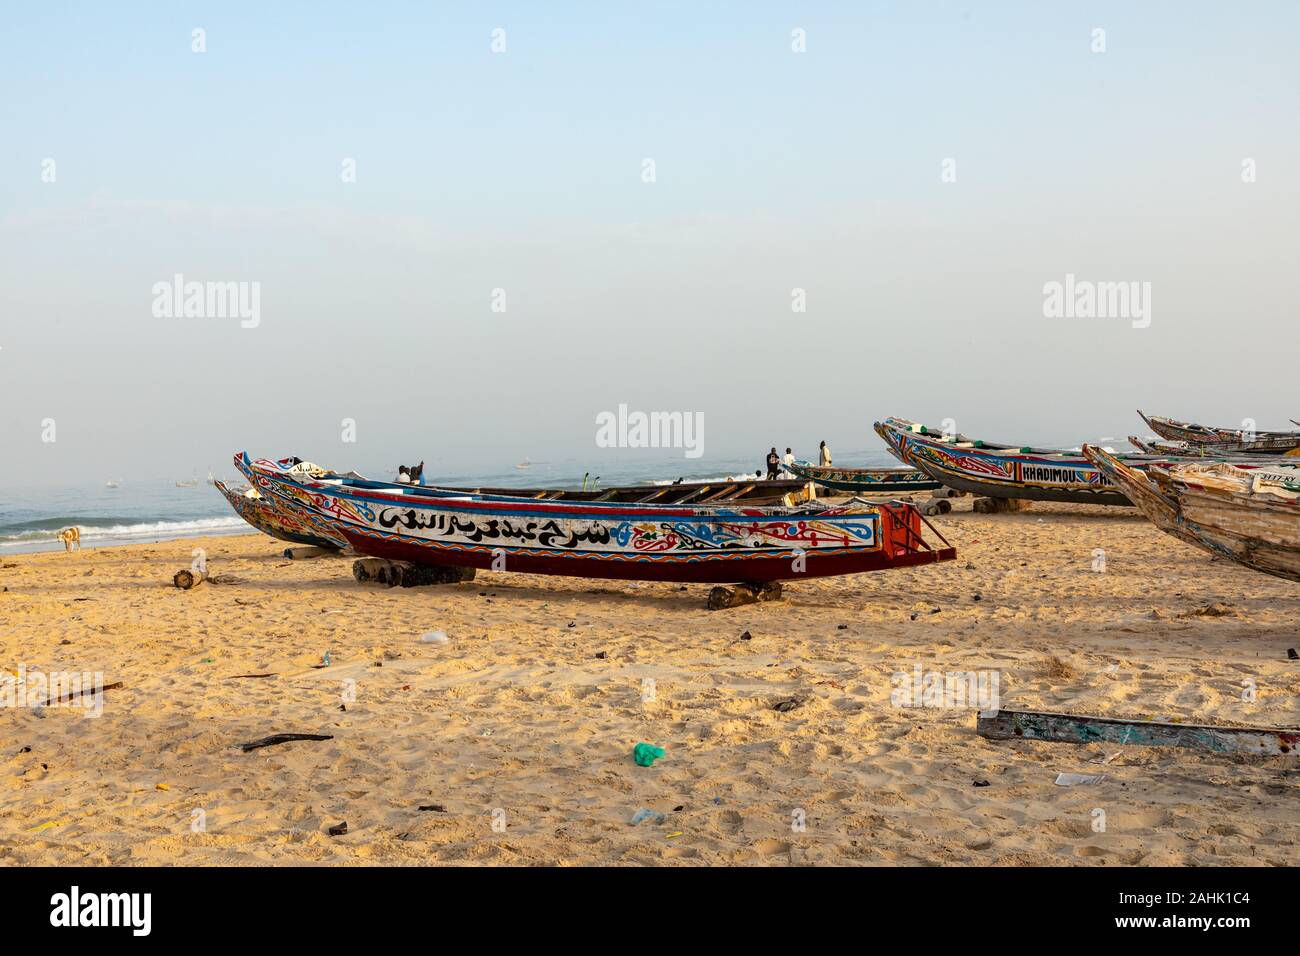 Traditional painted wooden fishing boat in Kayar, Senegal. West Africa. Stock Photo